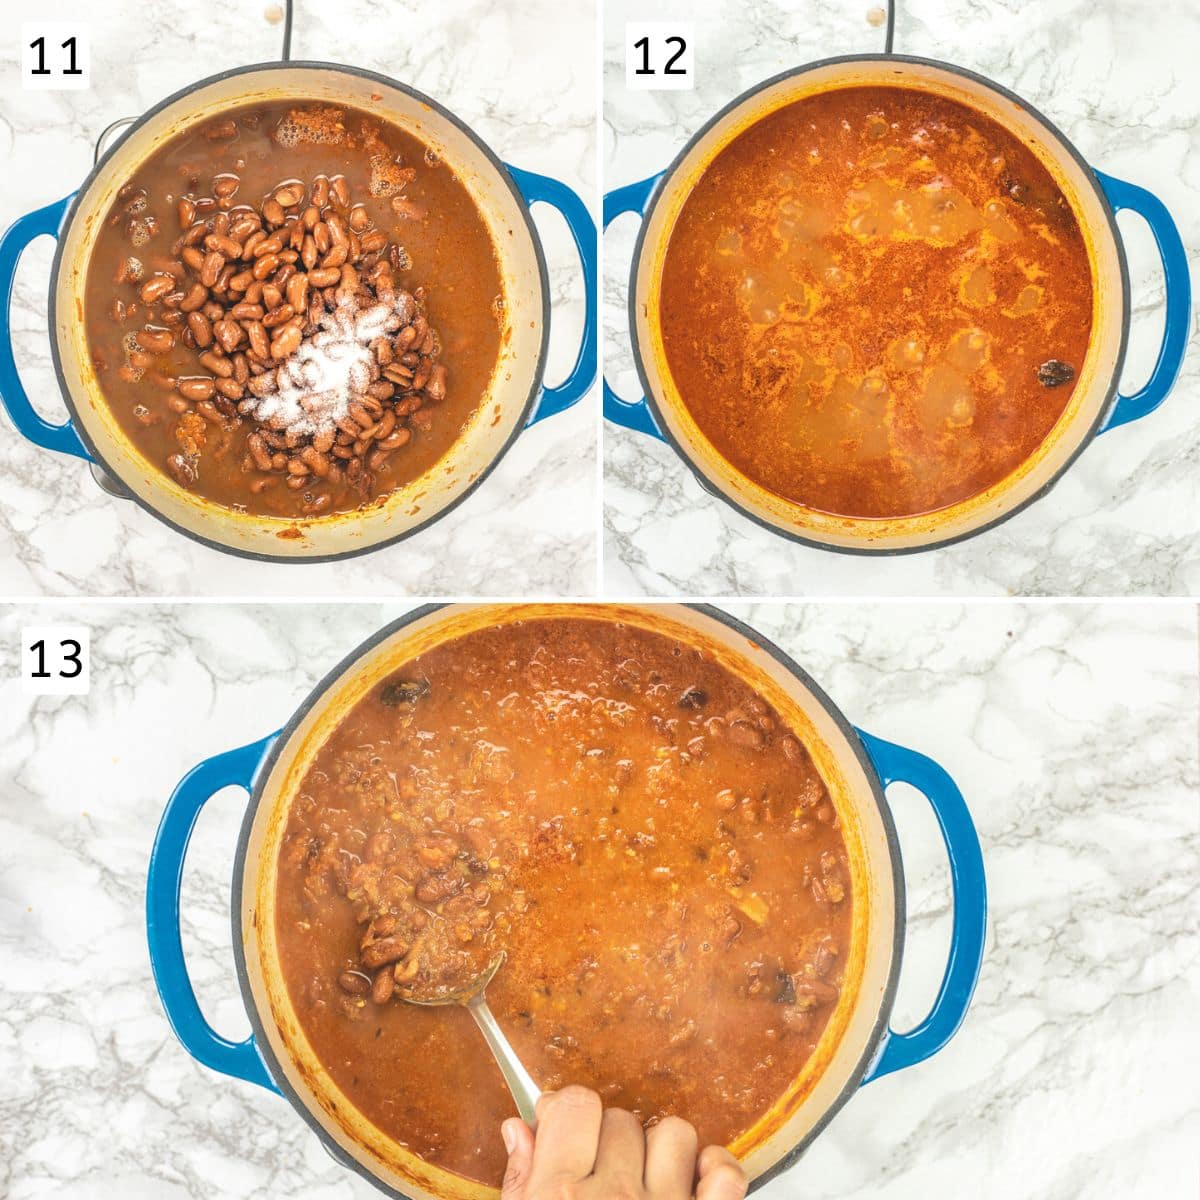 Collage of 3 images showing adding boiled rajma, salt, simmering gravy and showing textute with spoon.